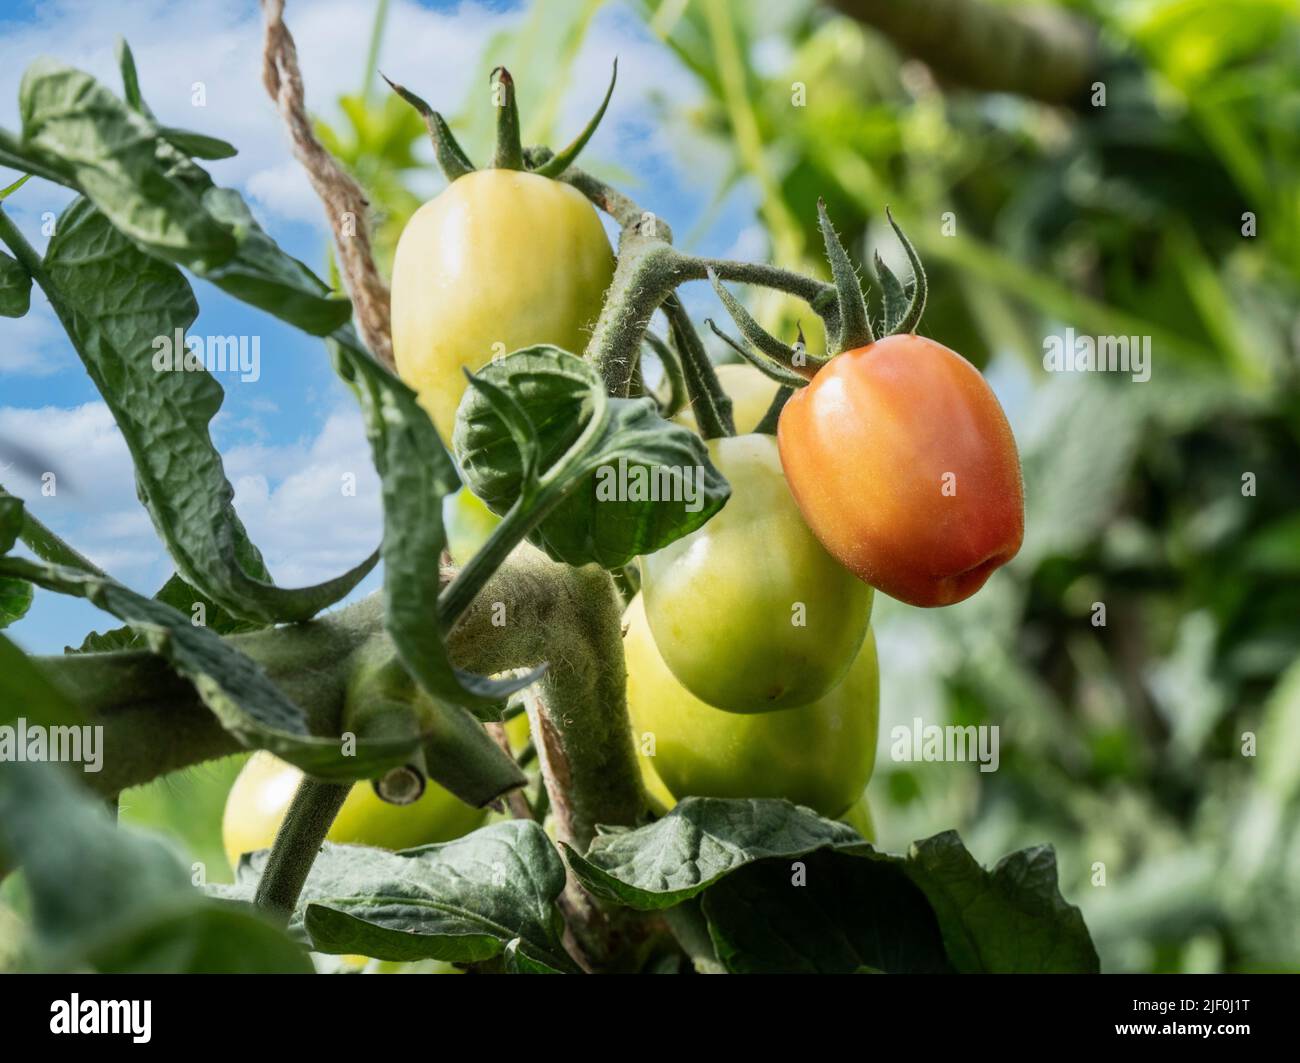 Tomato 'Crimson Plum' Solanum lycopersicum L. ripening on vine. A 'Roma' style succulent sweet plum with rich, deep flavour. The Crimson Plum will harvest from July. Outdoors in sunlit kitchen garden vegetable patch allotment. Stock Photo